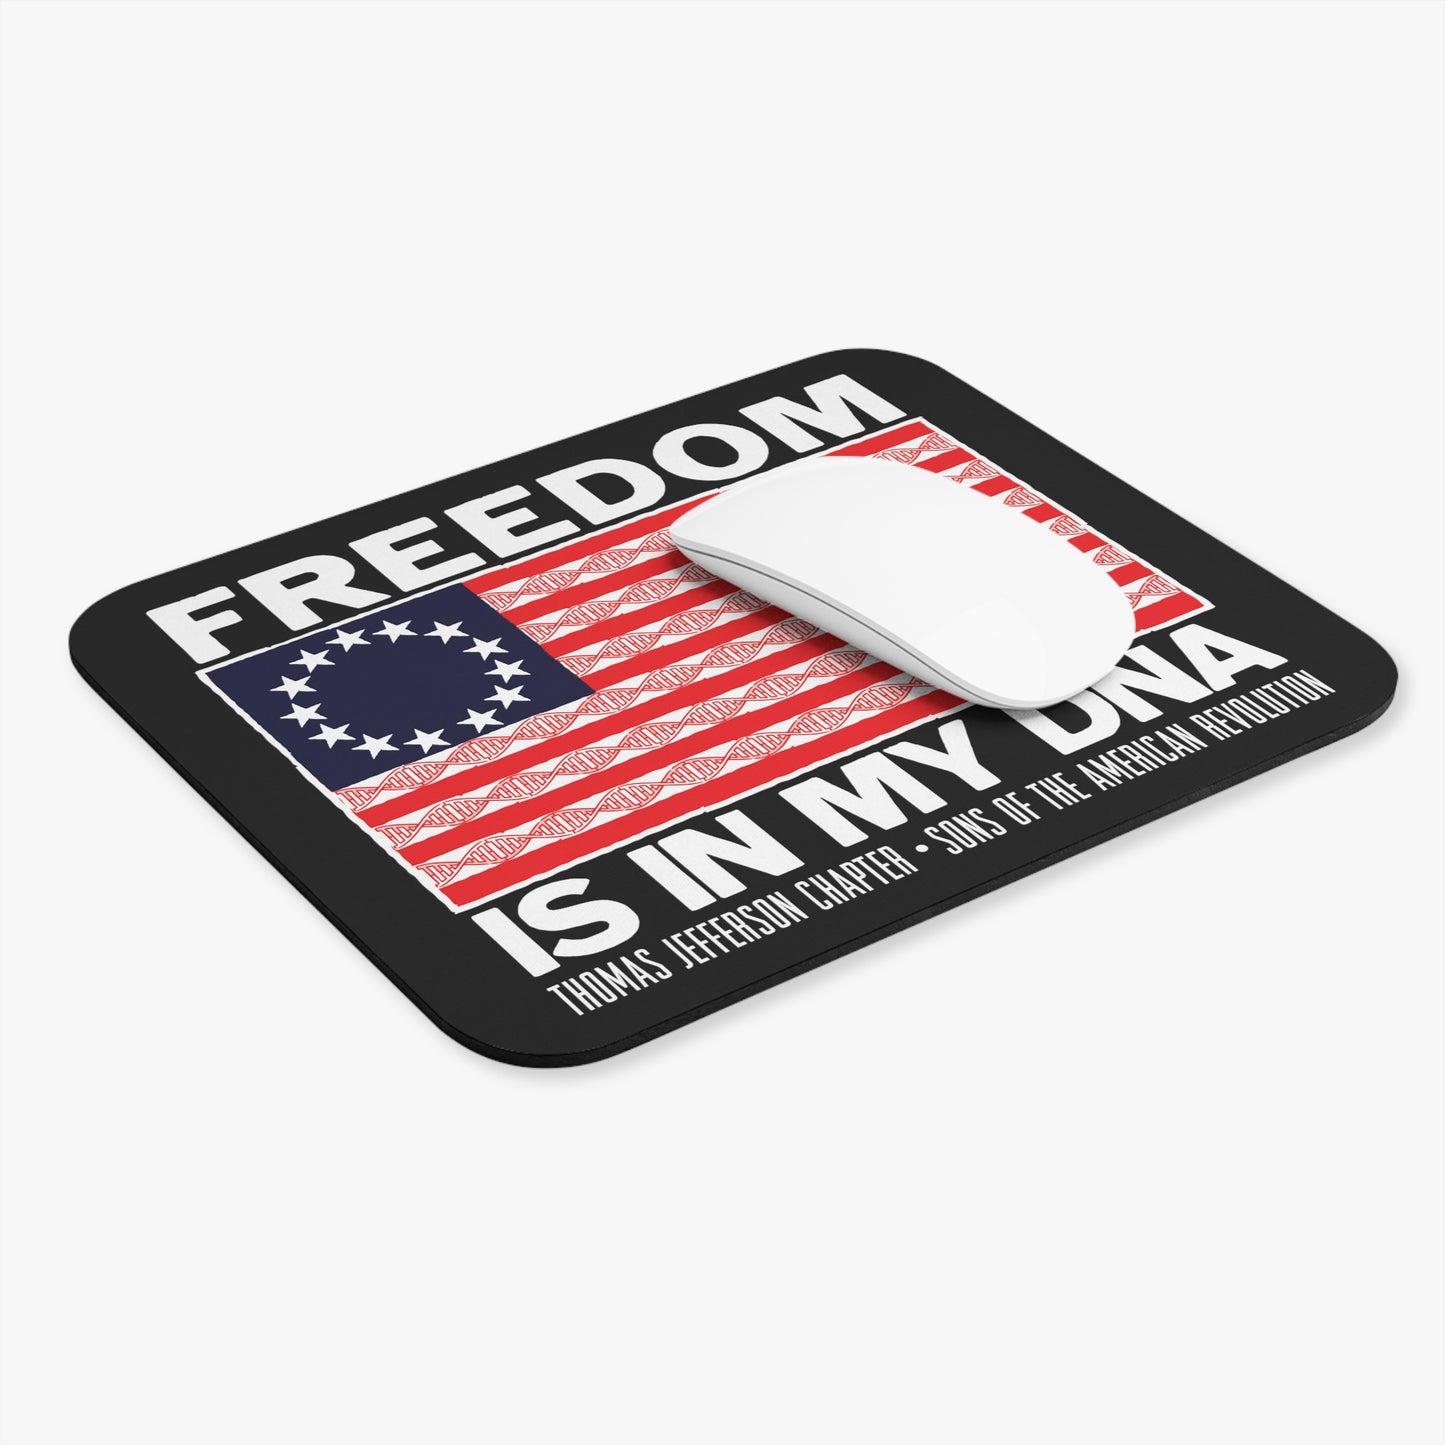 Thomas Jefferson Chapter "DNA" Mouse Pad